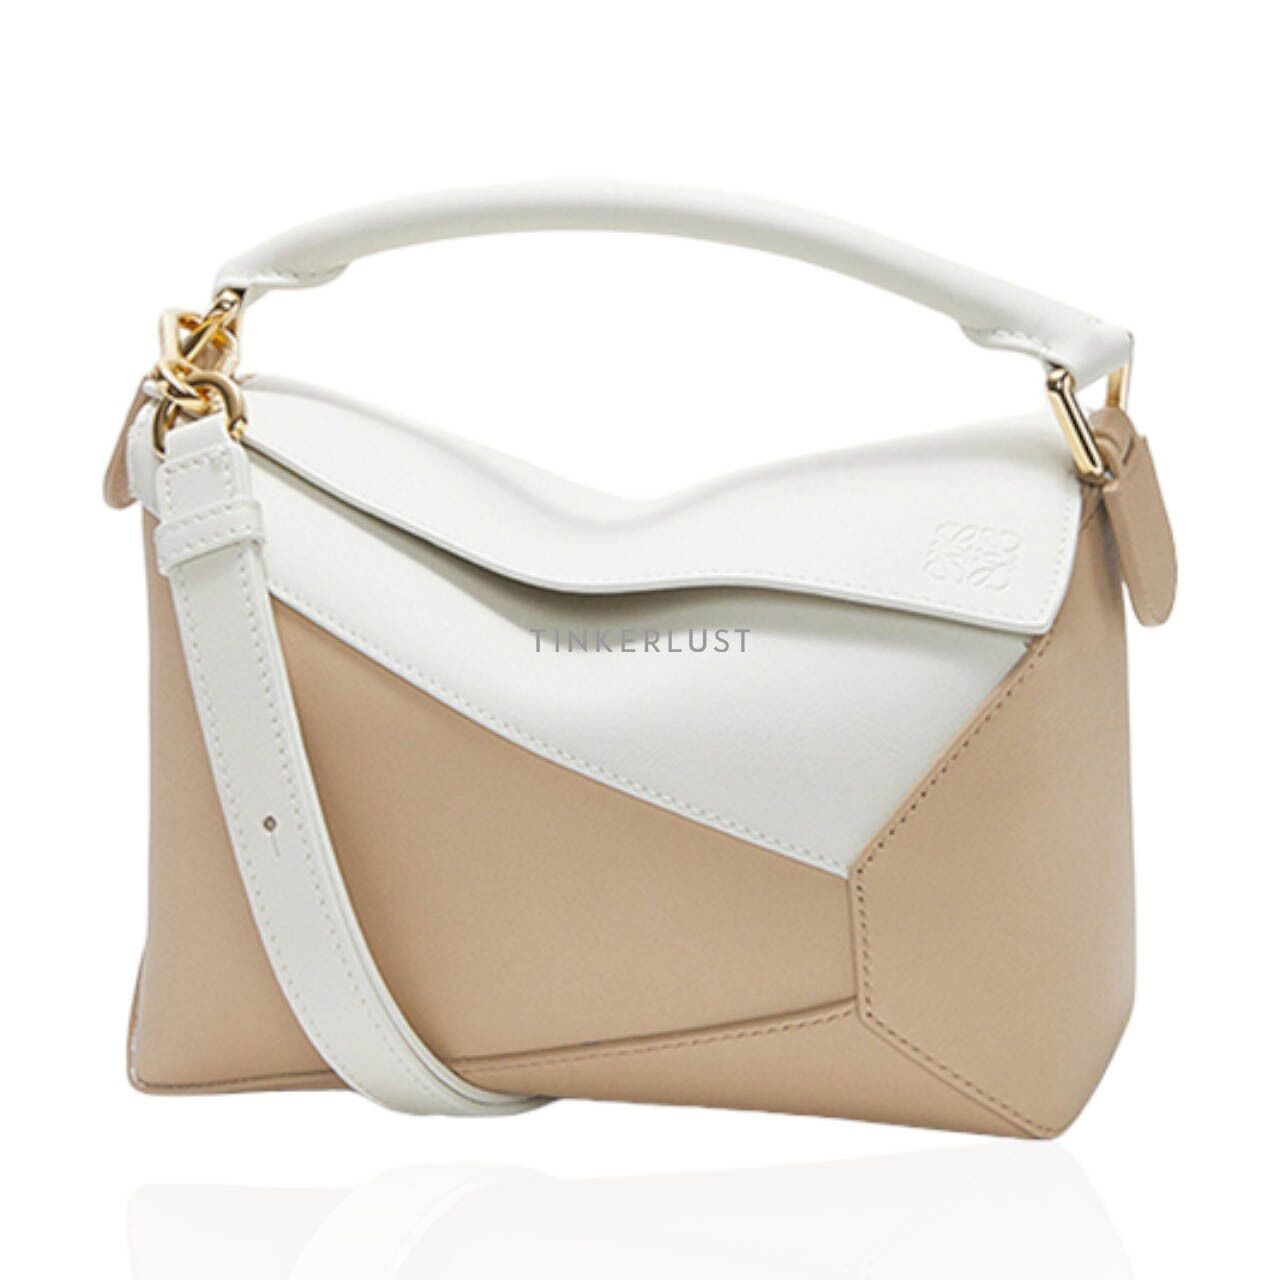 Loewe Small Puzzle Bag in Soft White/Paper Craft Classic Calfskin